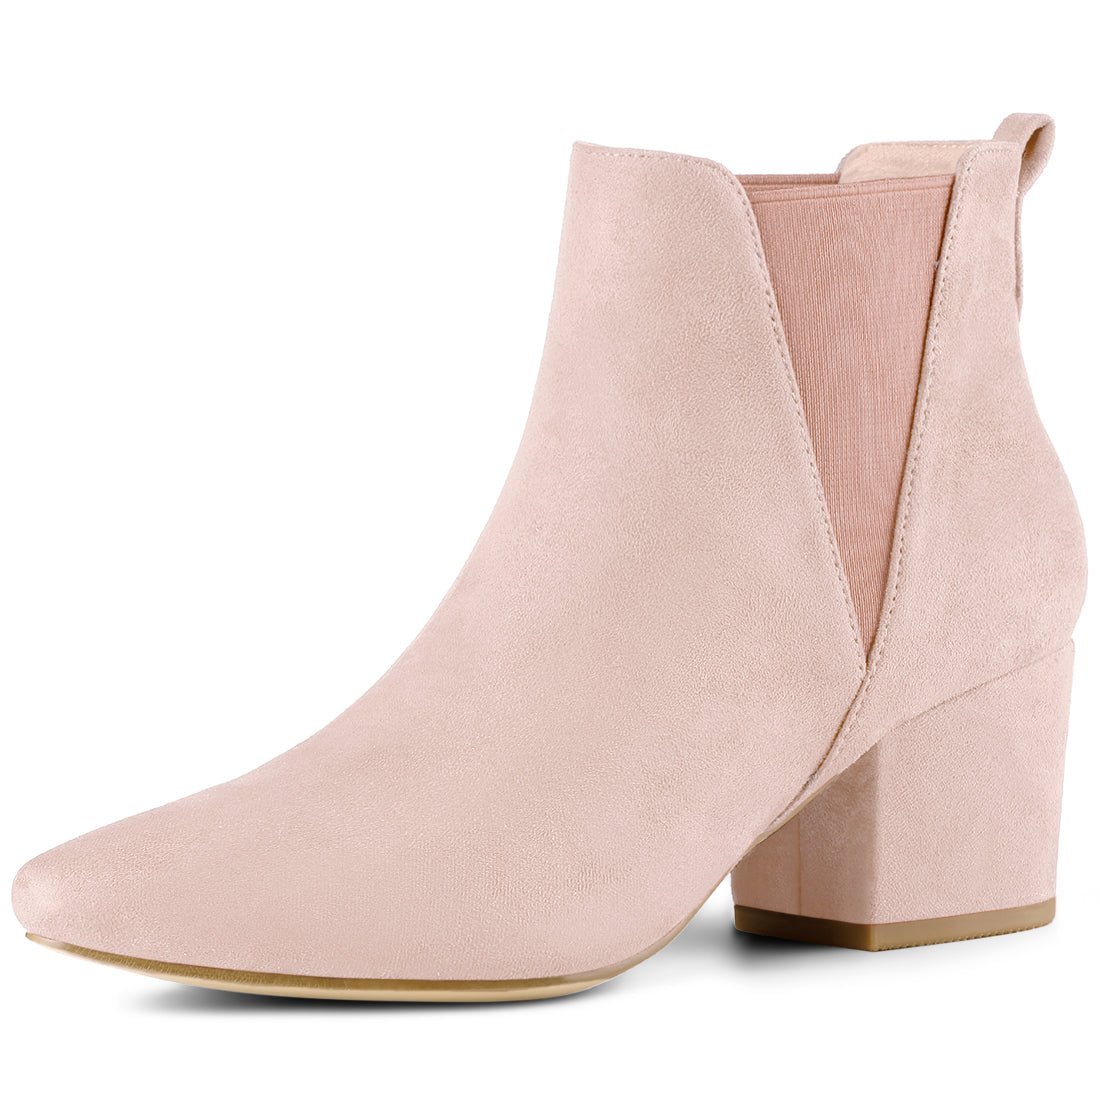 Allegra K Faux Suede Pointed Toe Block Heel Ankle Chelsea Boots